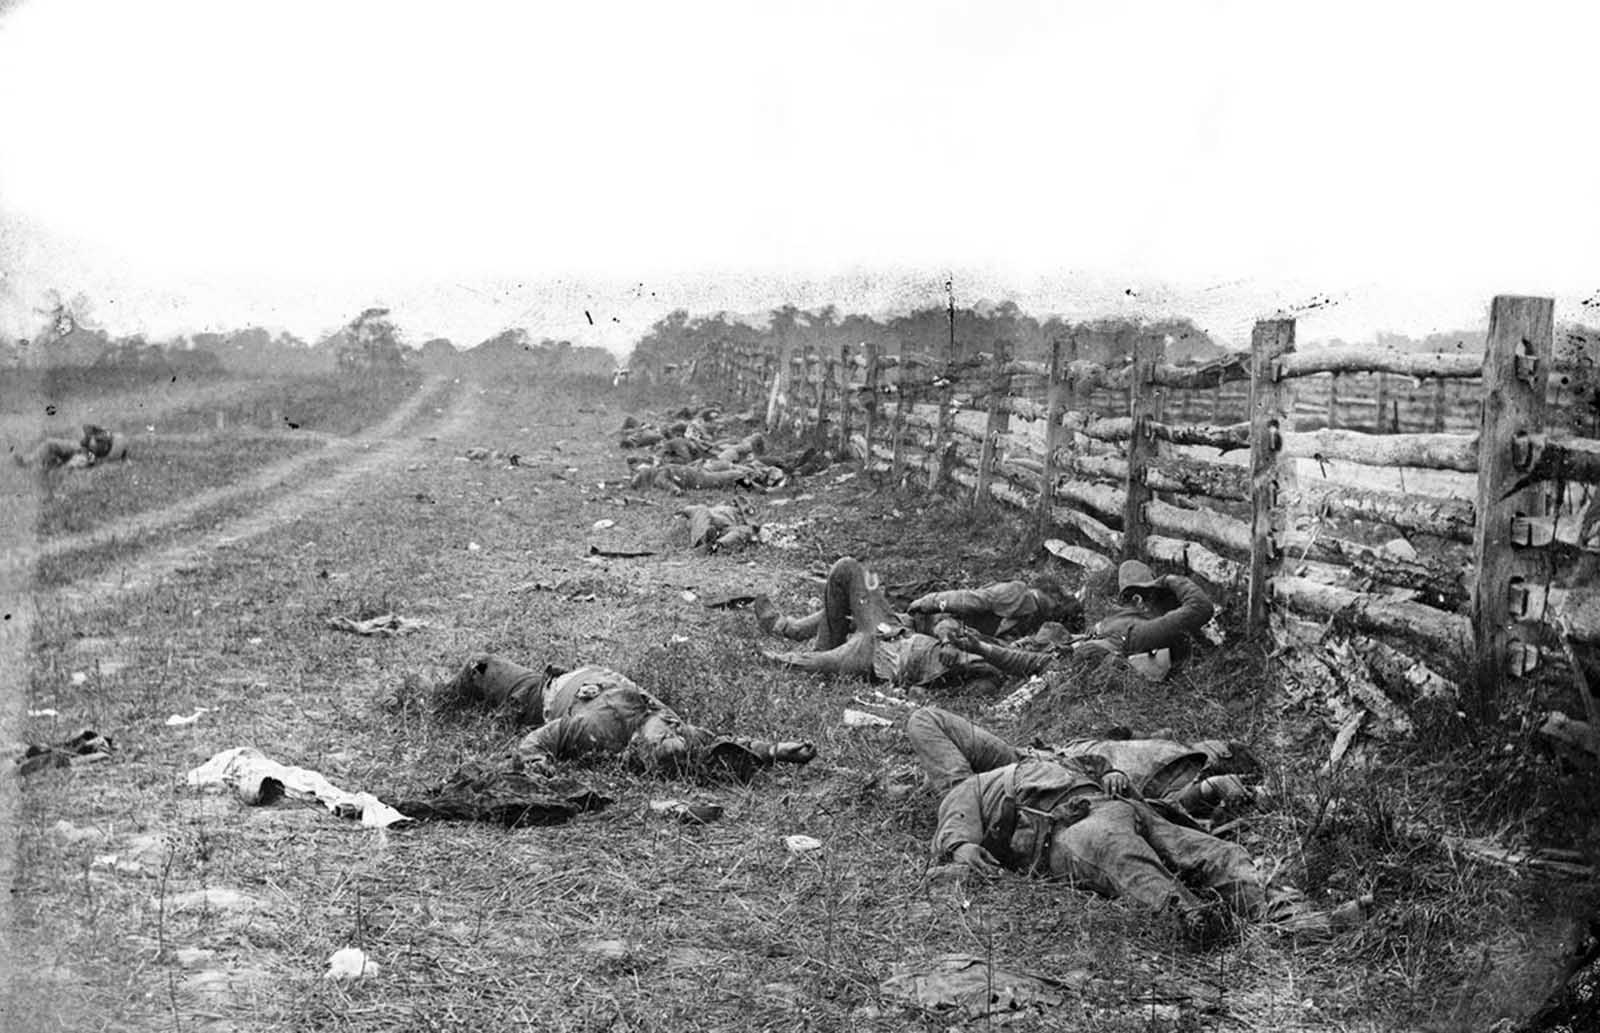 Confederate dead lie strewn near a fence on the Hagerstown road, after the Battle of Antietam, in Maryland, in September of 1862.